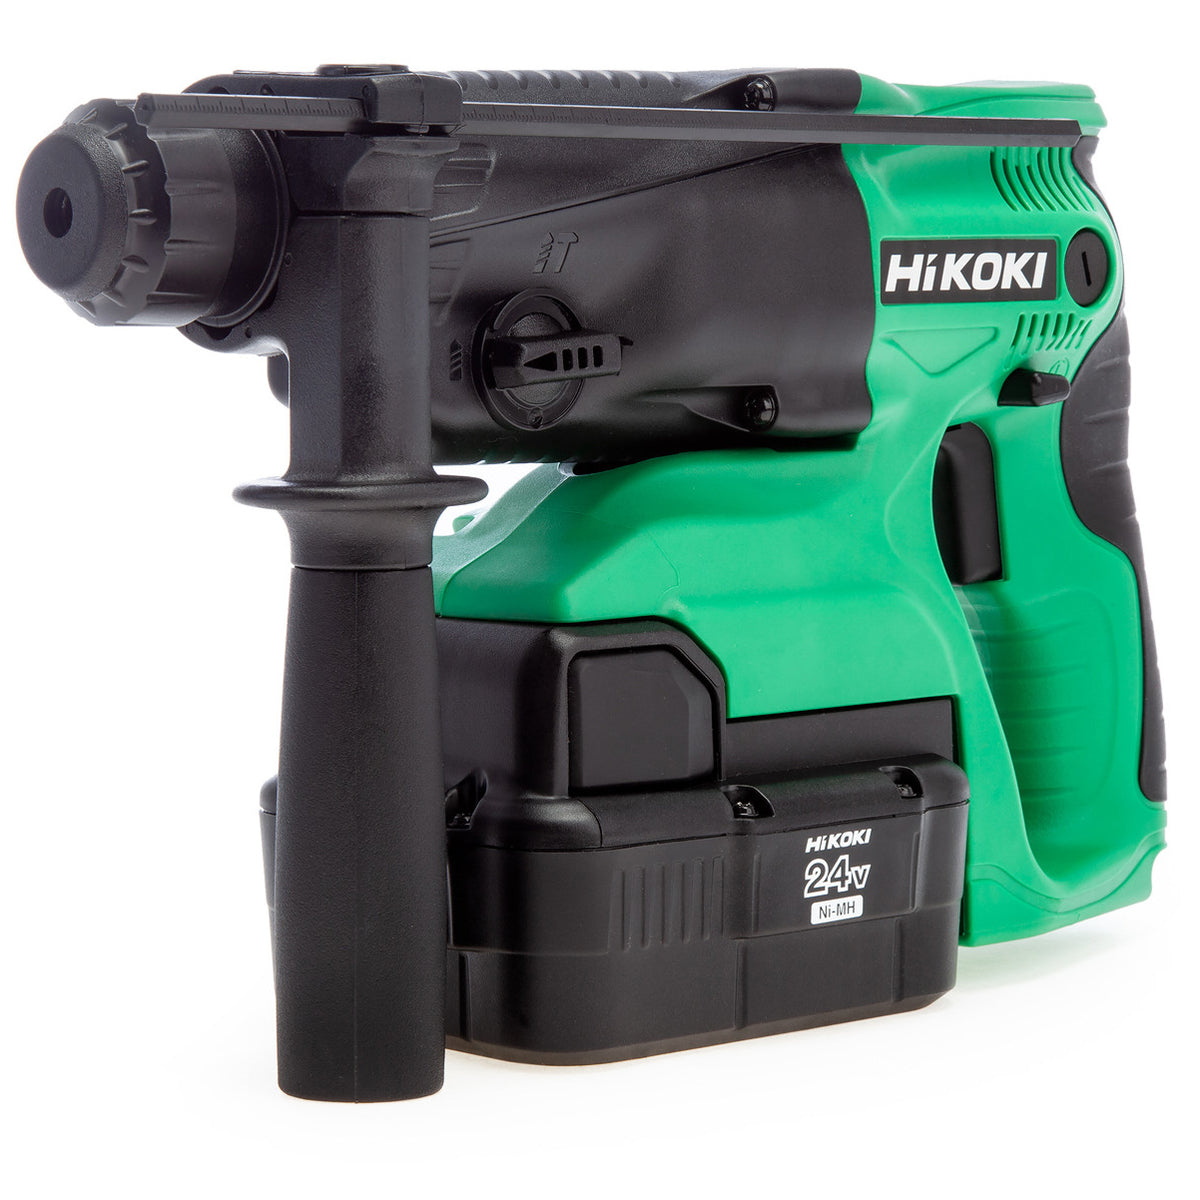 HiKOKI DH24DVC 24V SDS-Plus Rotary Hammer Drill with 2 x 2.0Ah Ni-MH Batteries Charger & Case